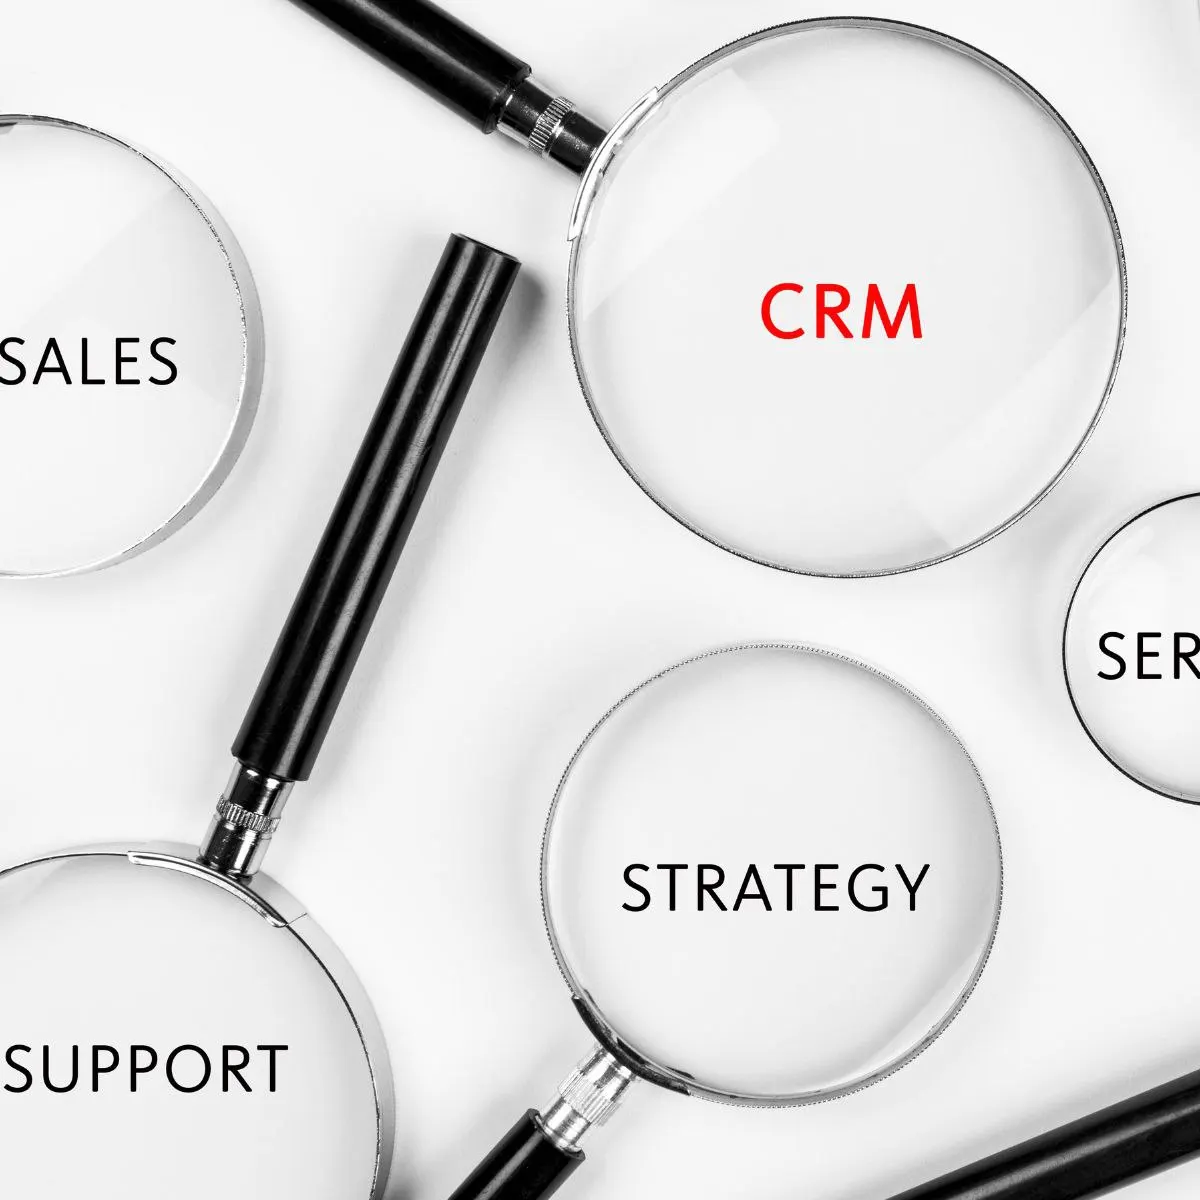 best crm software for garment companies |comprehensive crm design for garment business 2022 | australia |canada |usa |uk - buy leading crm developers for garment industry |upgrade your sales with our exclusive